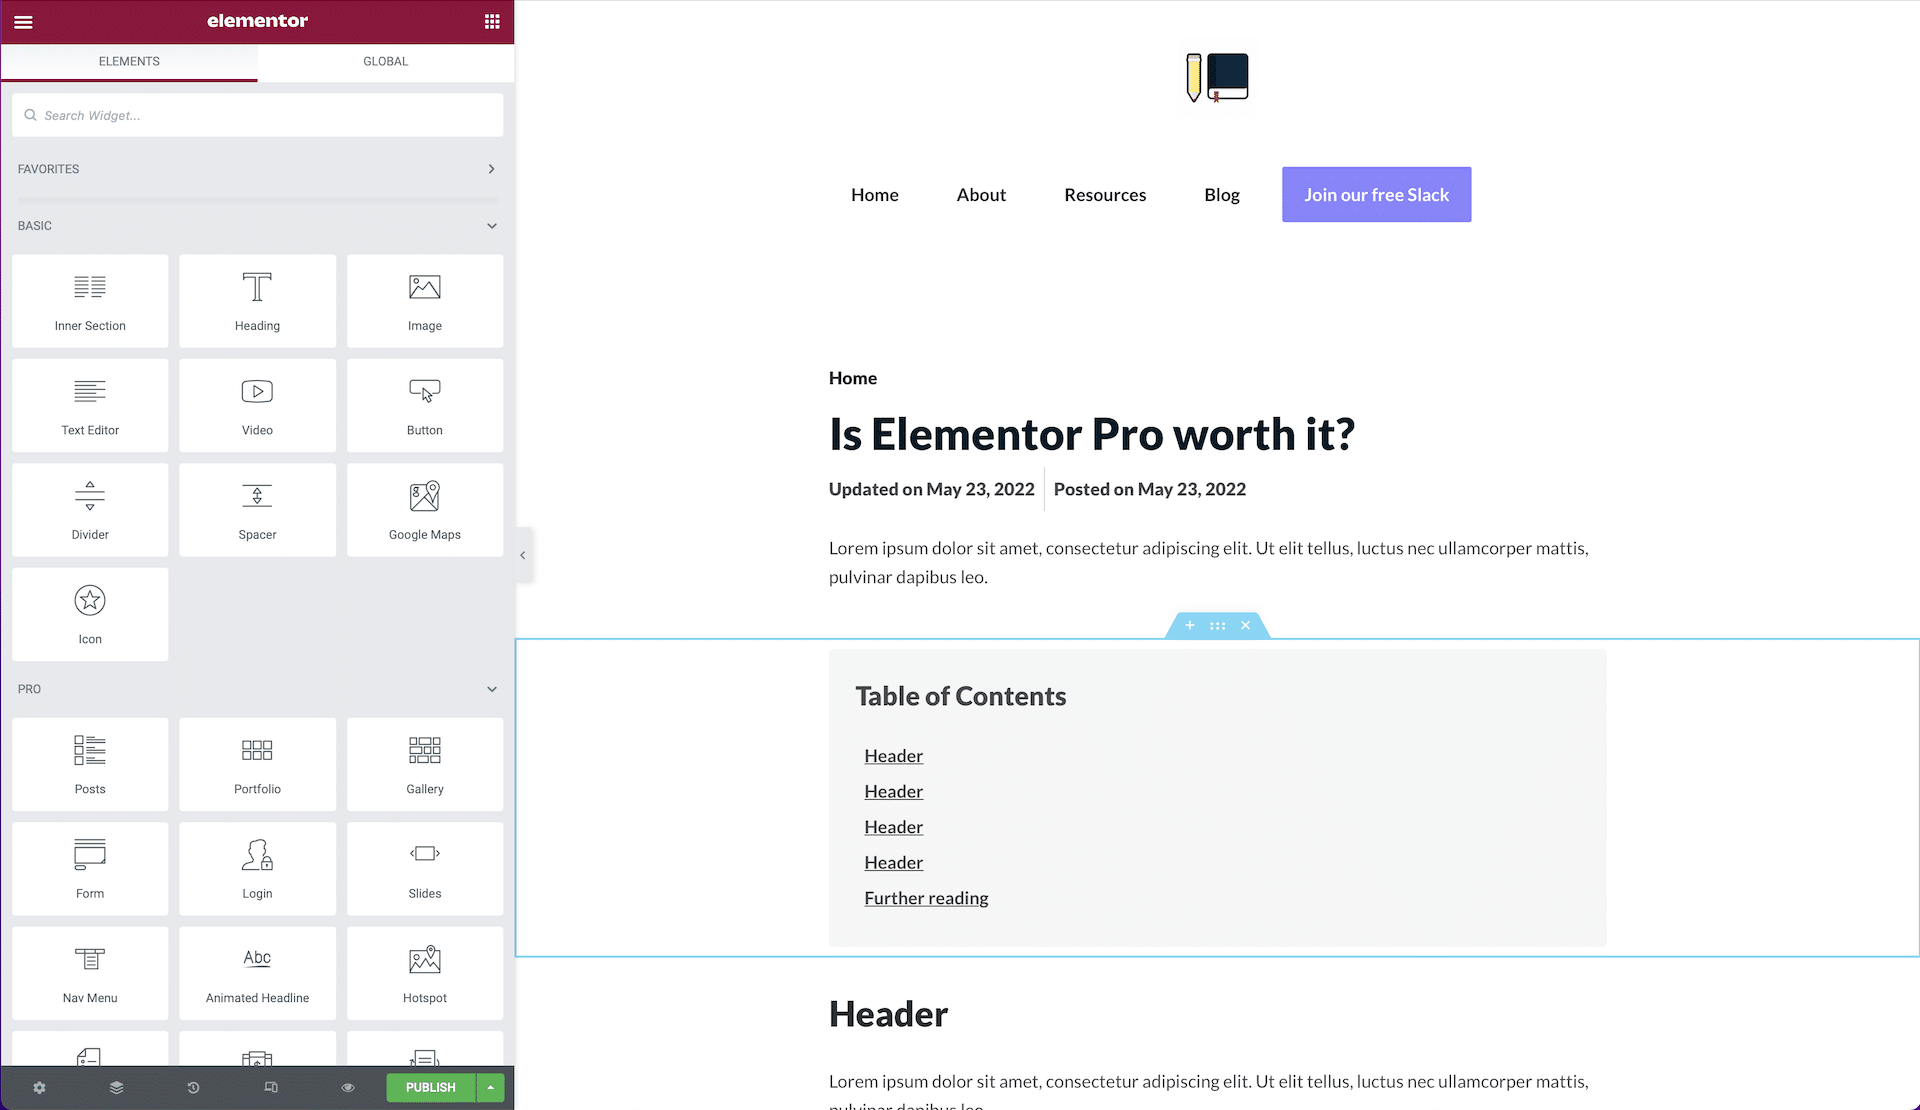 An example of a template you can create using Elementor Pro.